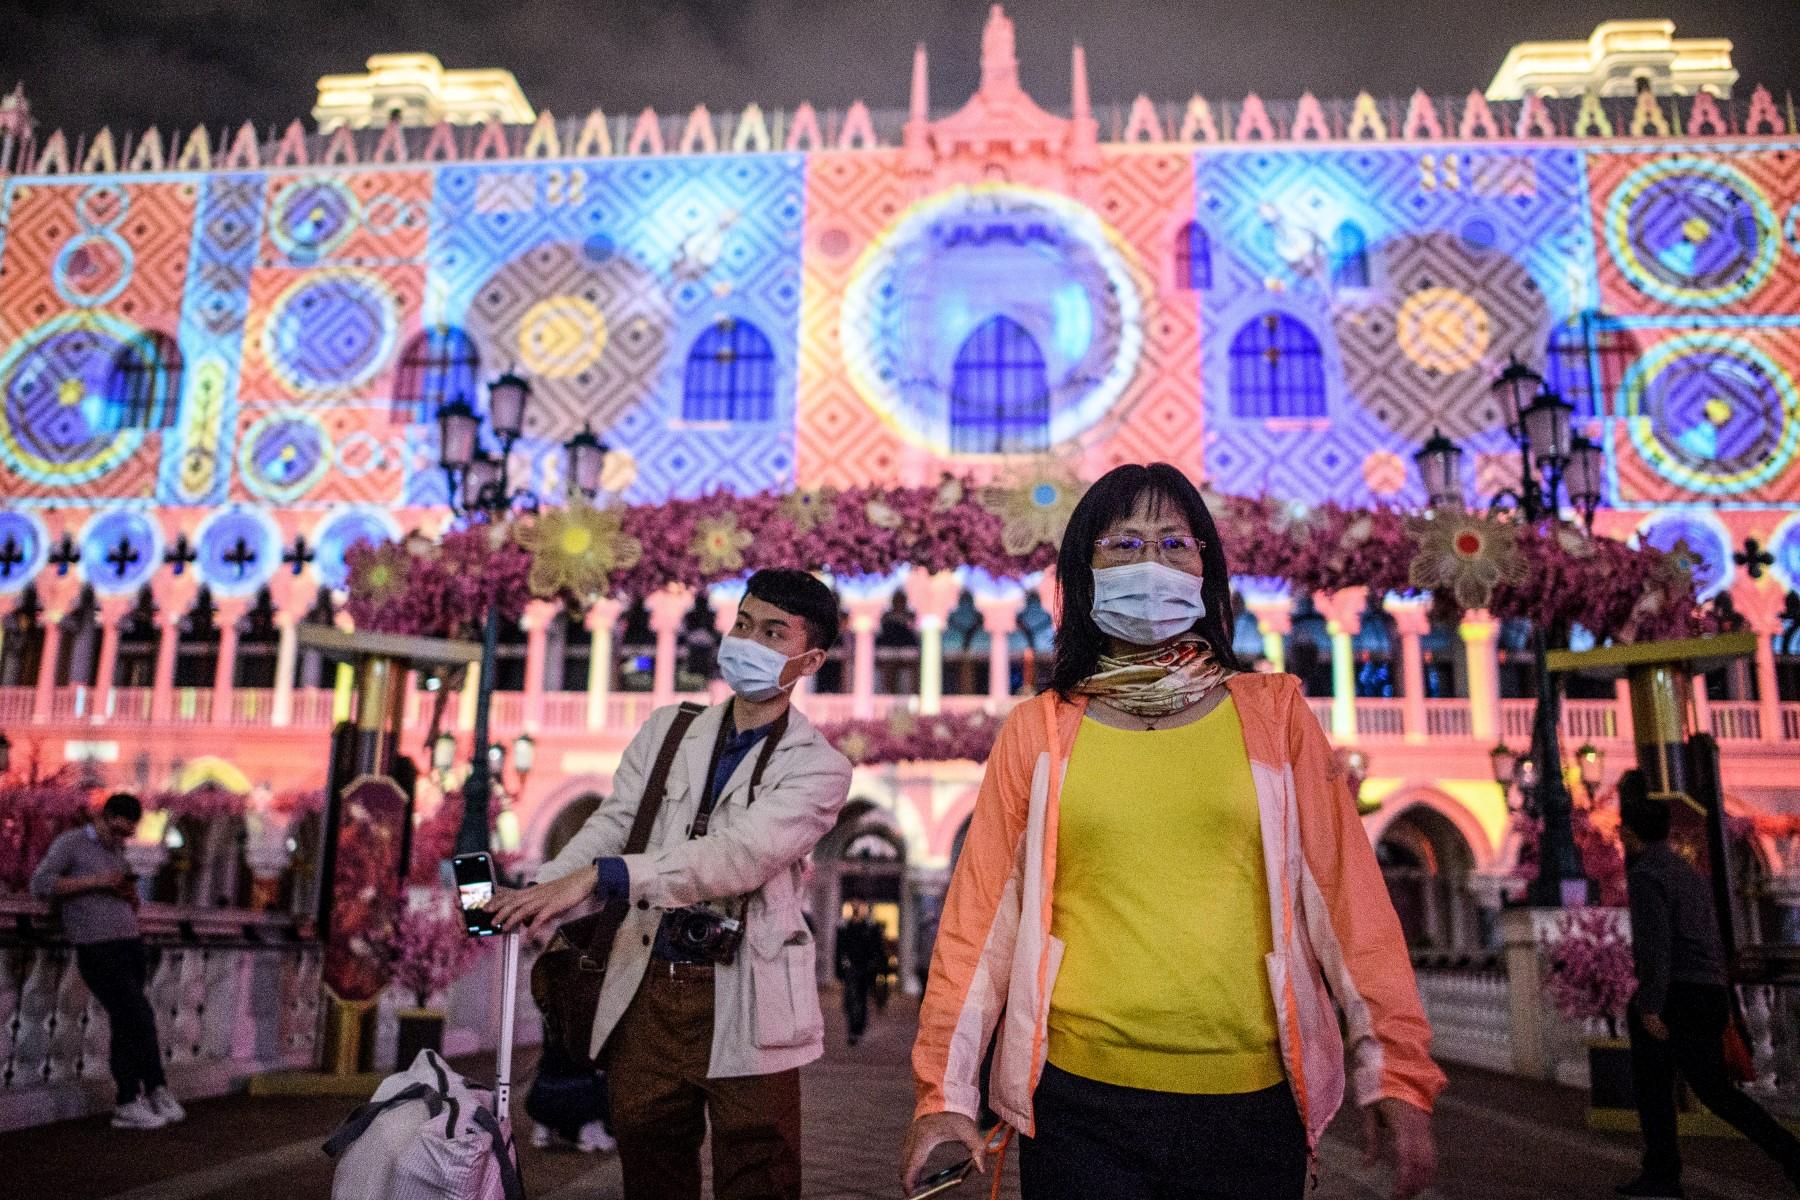 Visitors wear face masks as they walk outside the Venetian casino hotel resort as a Lunar New Year light display is projected upon a facade of the building in Macau on Jan 22, 2020. Photo: AFP